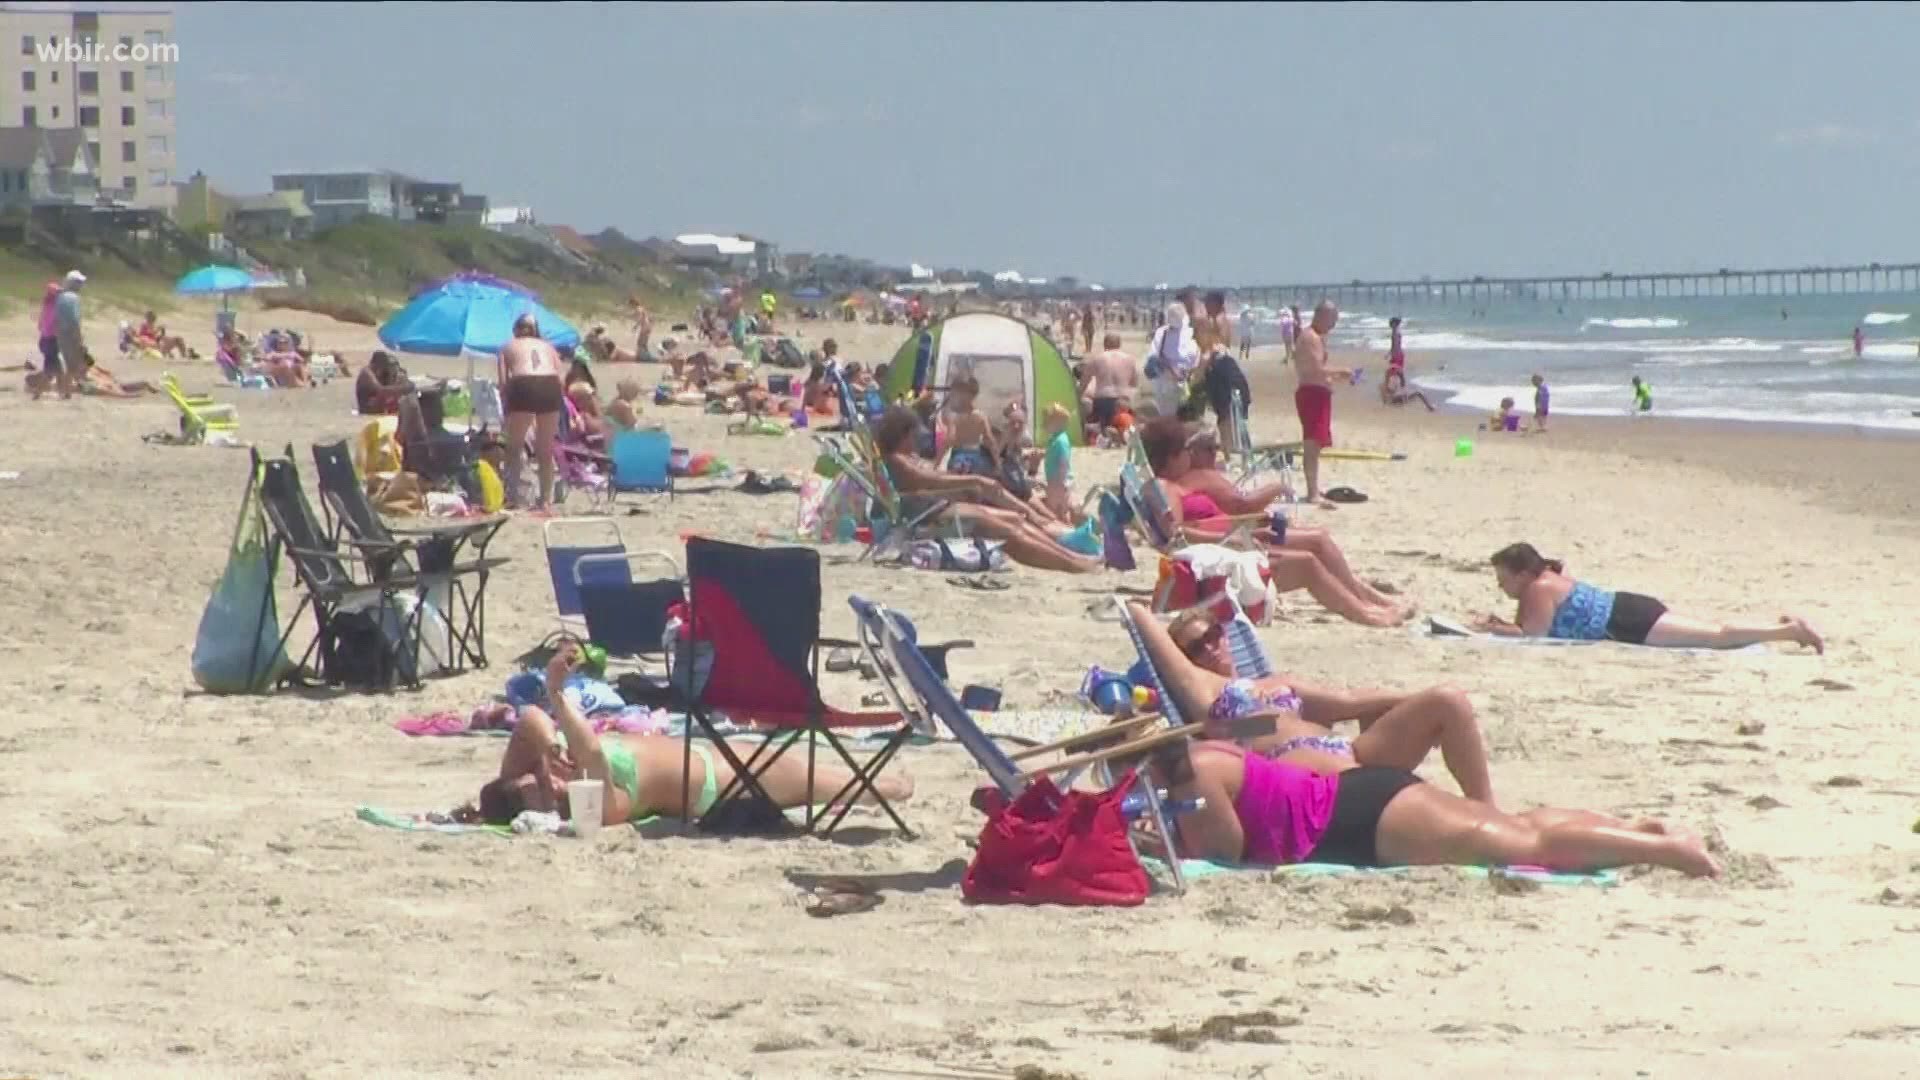 Dermatologists say a chemical called 'benzene', which is found in sunscreens, could lead to some cancers.